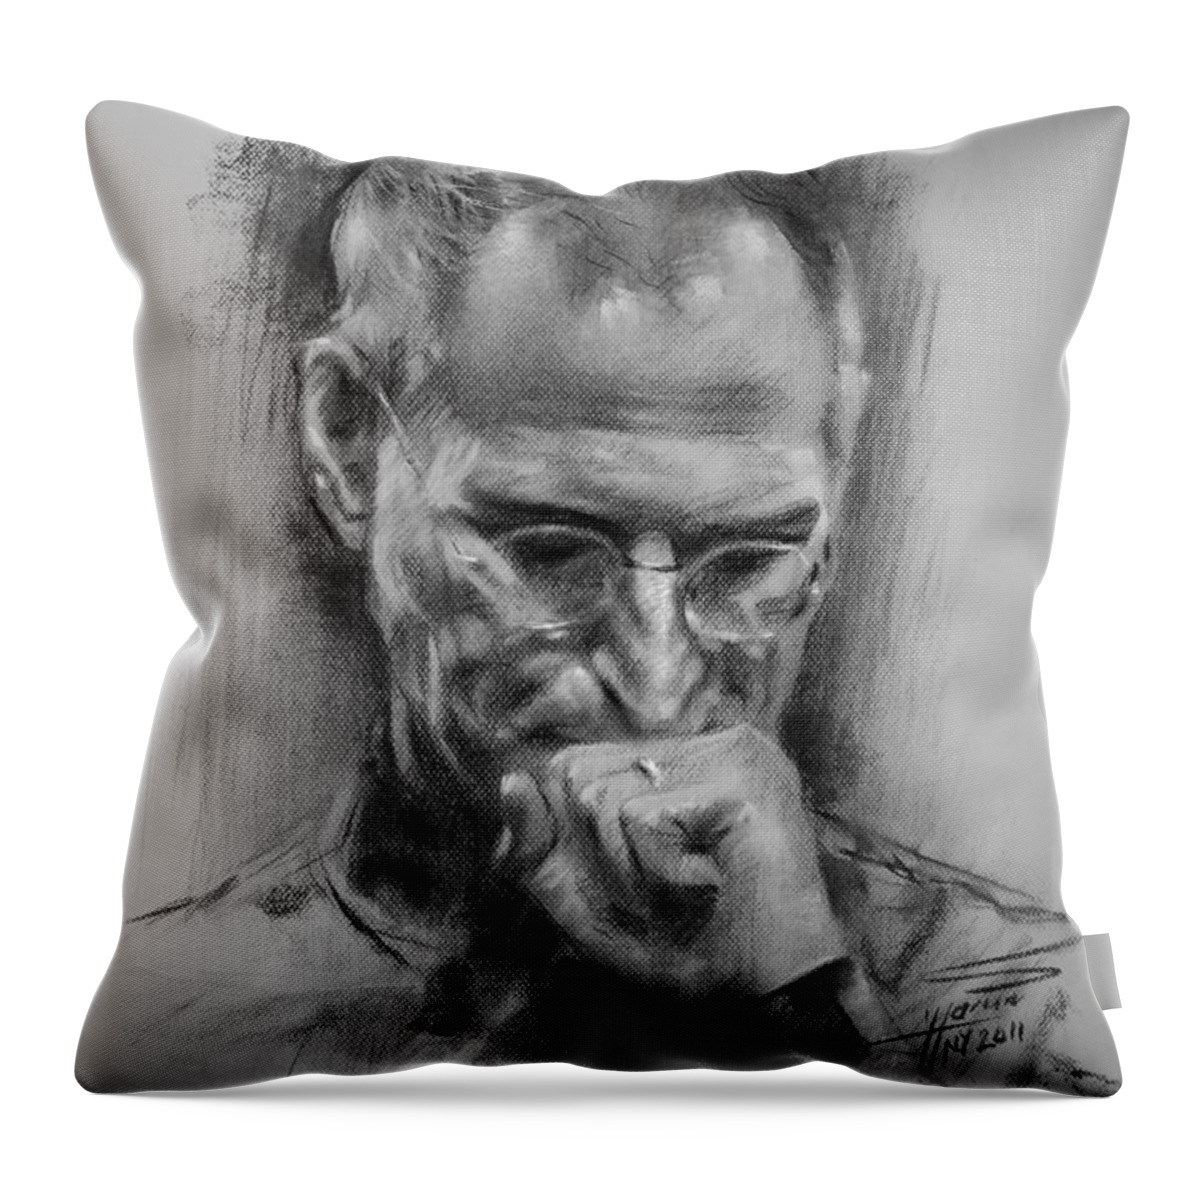 Steve Jobs Throw Pillow featuring the drawing Steve Jobs by Ylli Haruni